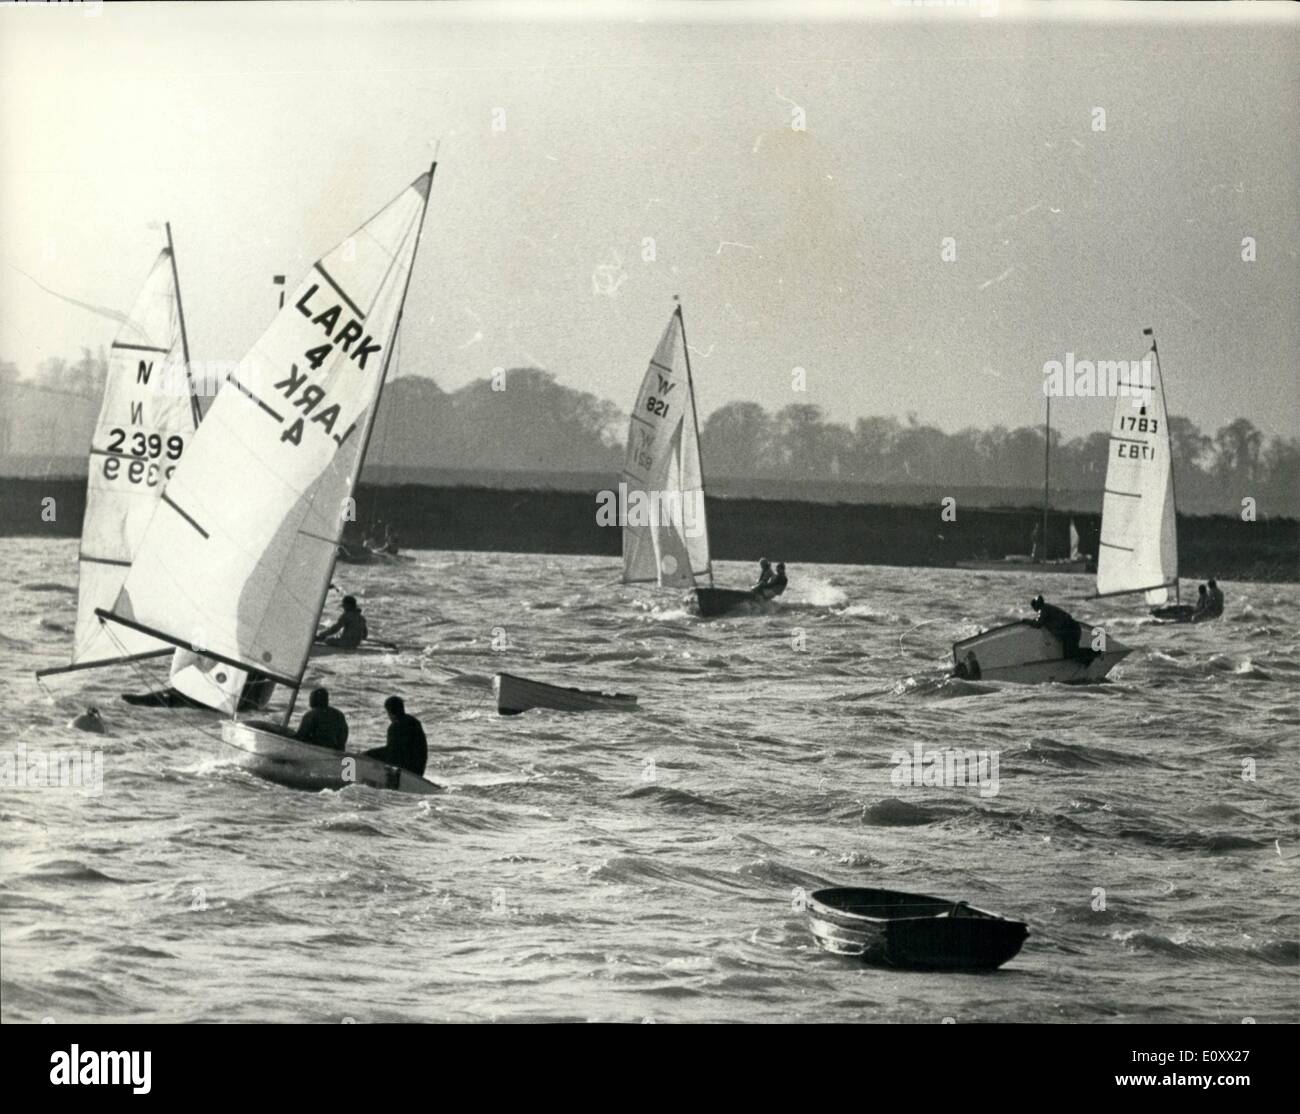 Dec. 12, 1967 - The Royal Corinthian yacht club icicle trophy race at Burnham-on-Crouch.: Several competitors got a ducking in the icy water while competing in the Royal Corinthian Yacht Club Icicle Trophy race at Burnham-on-church today. Six International, seven National, and 13 other classes were represented. Photo shows one of the competitors clings to his overturned craft as some of the other craft manoeuver around him for the start of the race. Stock Photo